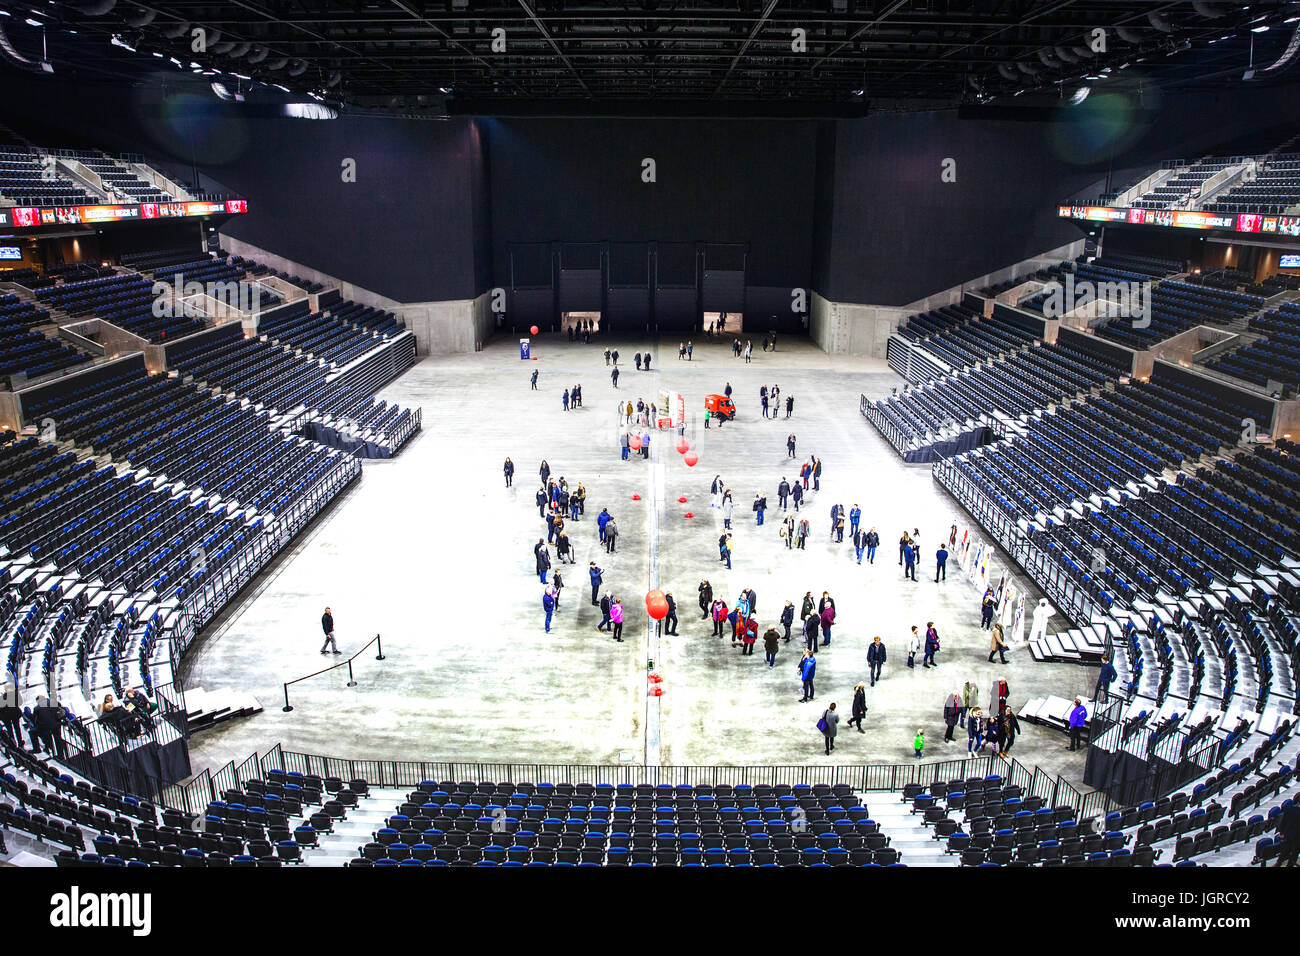 Inside the Royal Arena, which is an indoor cultural meeting place Copenhagen, Denmark. The Arena is known for its design and hosting events such as the Eurovision Song Contest